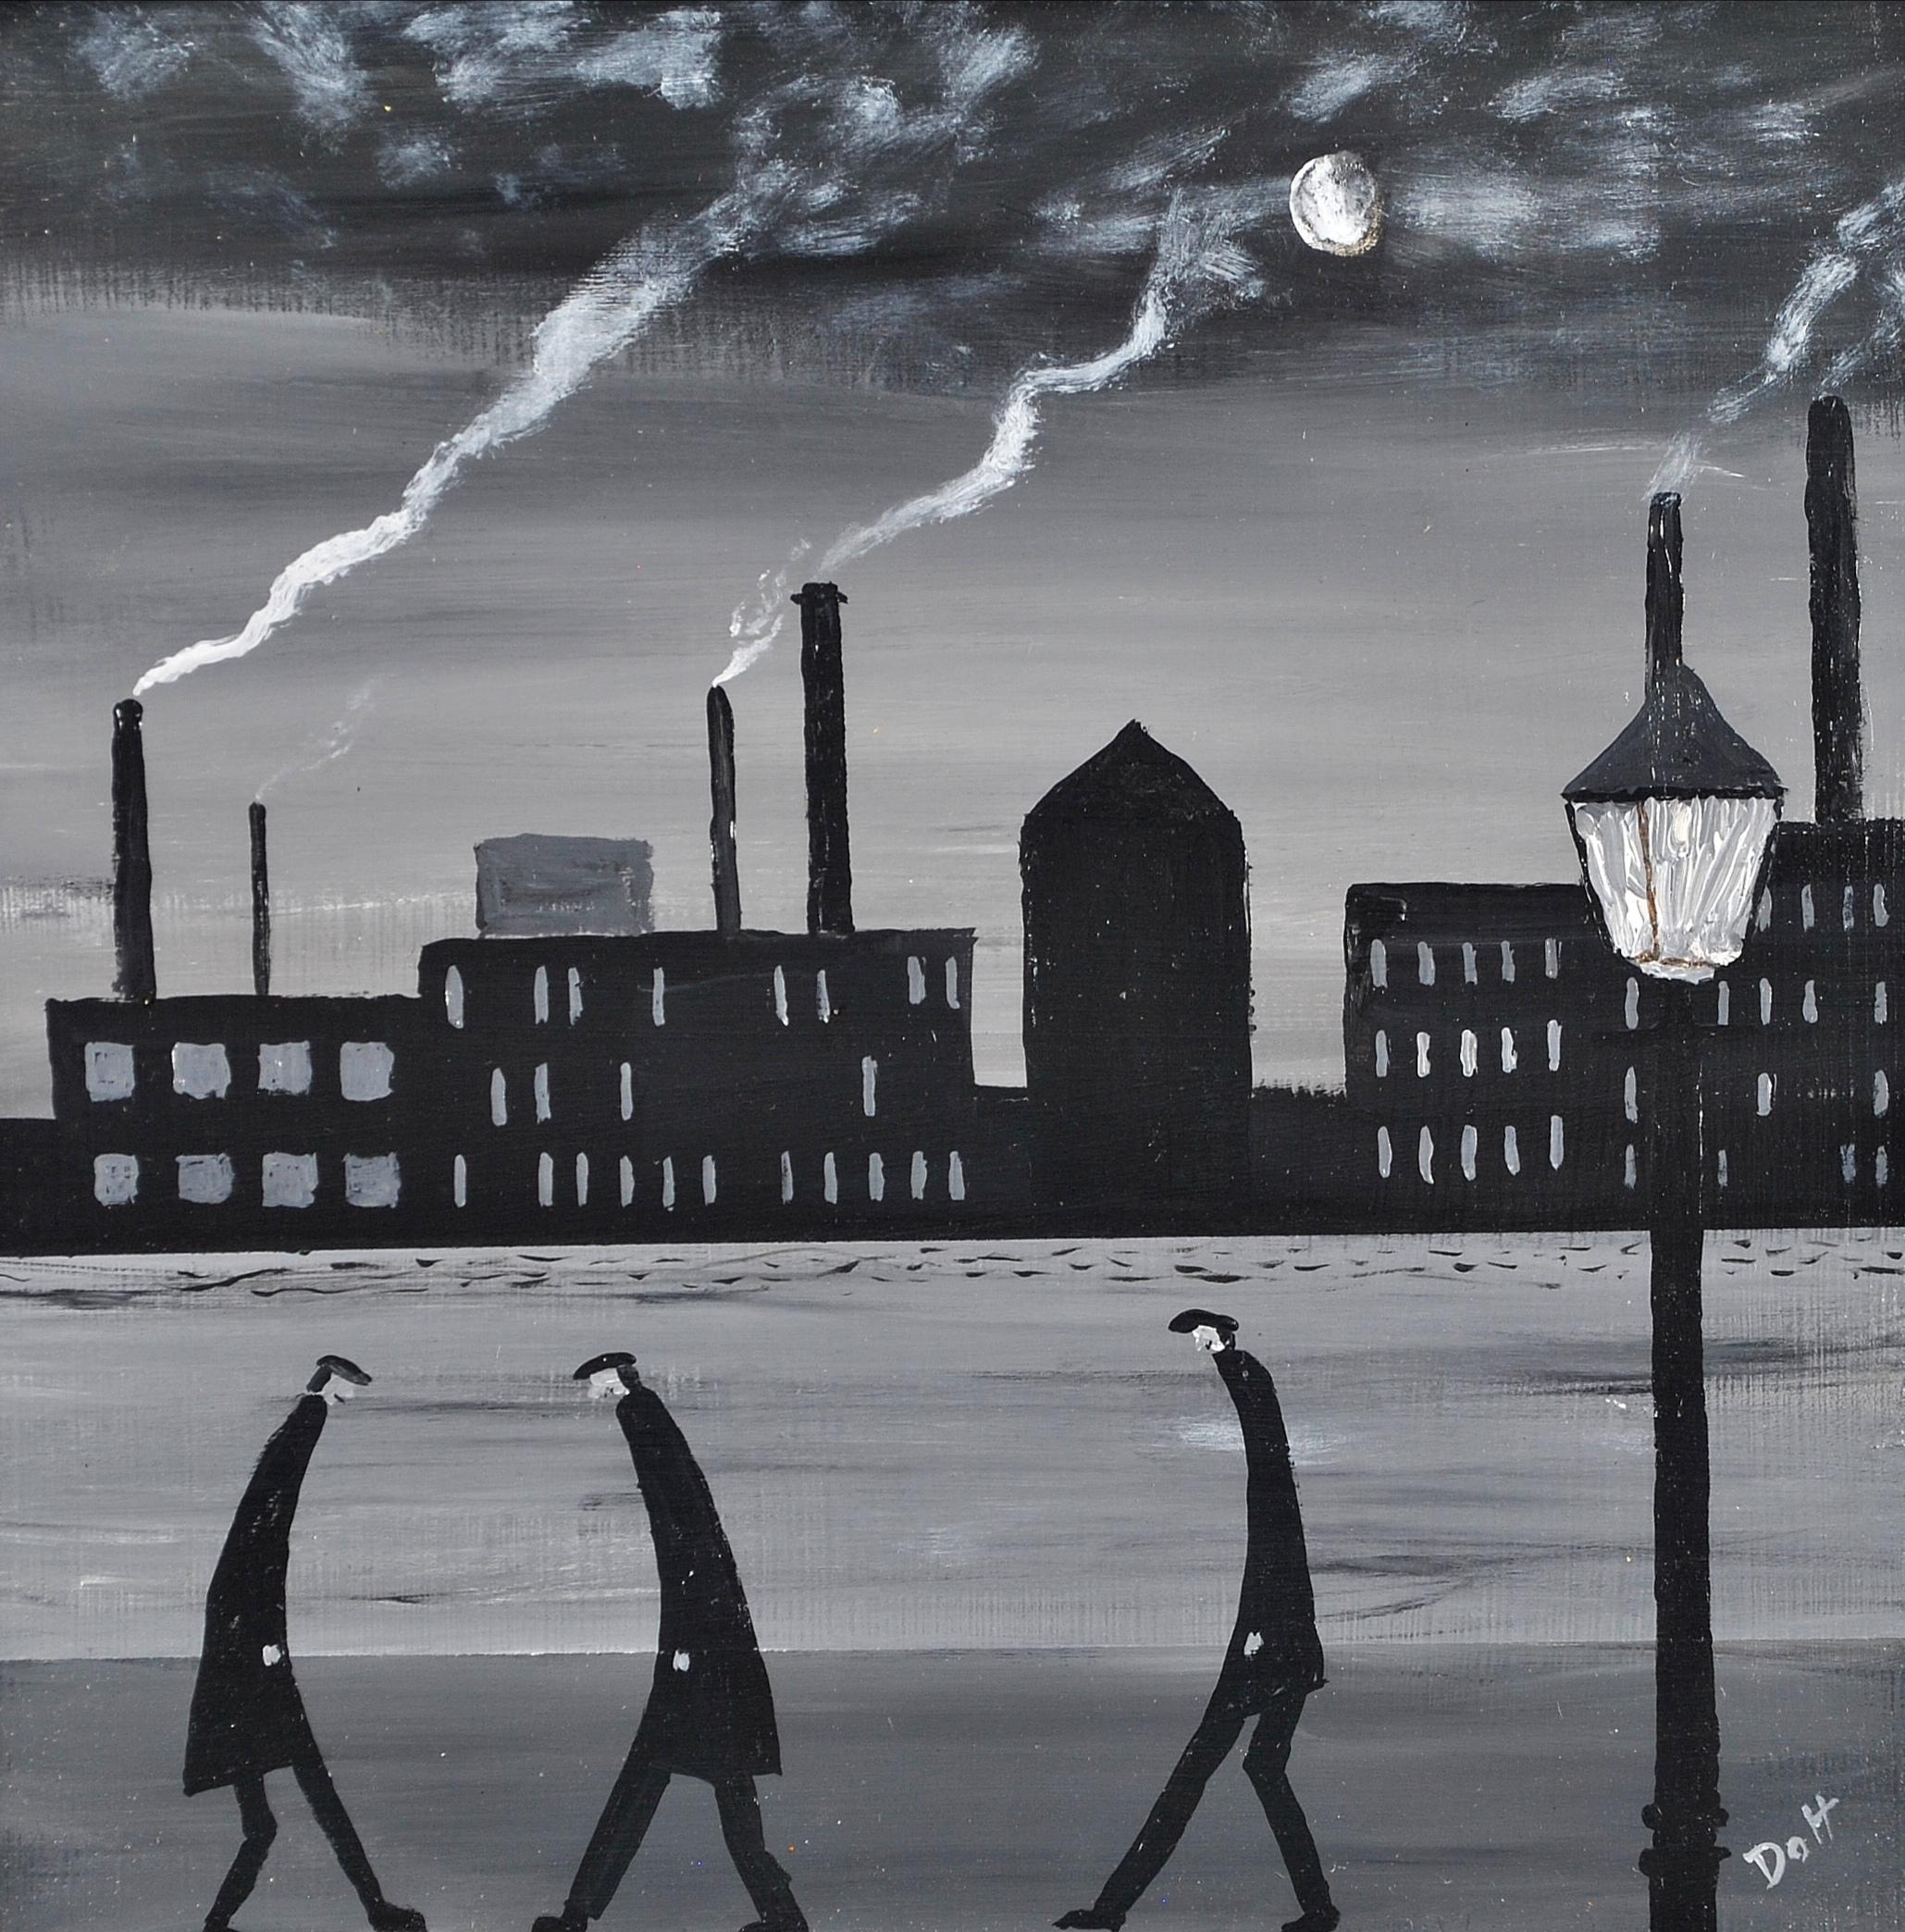 A beautiful 20th century oil on board depicting figures in an industrial Northern landscape by Vincent Dott. Excellent quality work in the manner of L.S. Lowry. Signed lower right and presented in a silver frame.

Artist: Vincent Dott (British, 20th